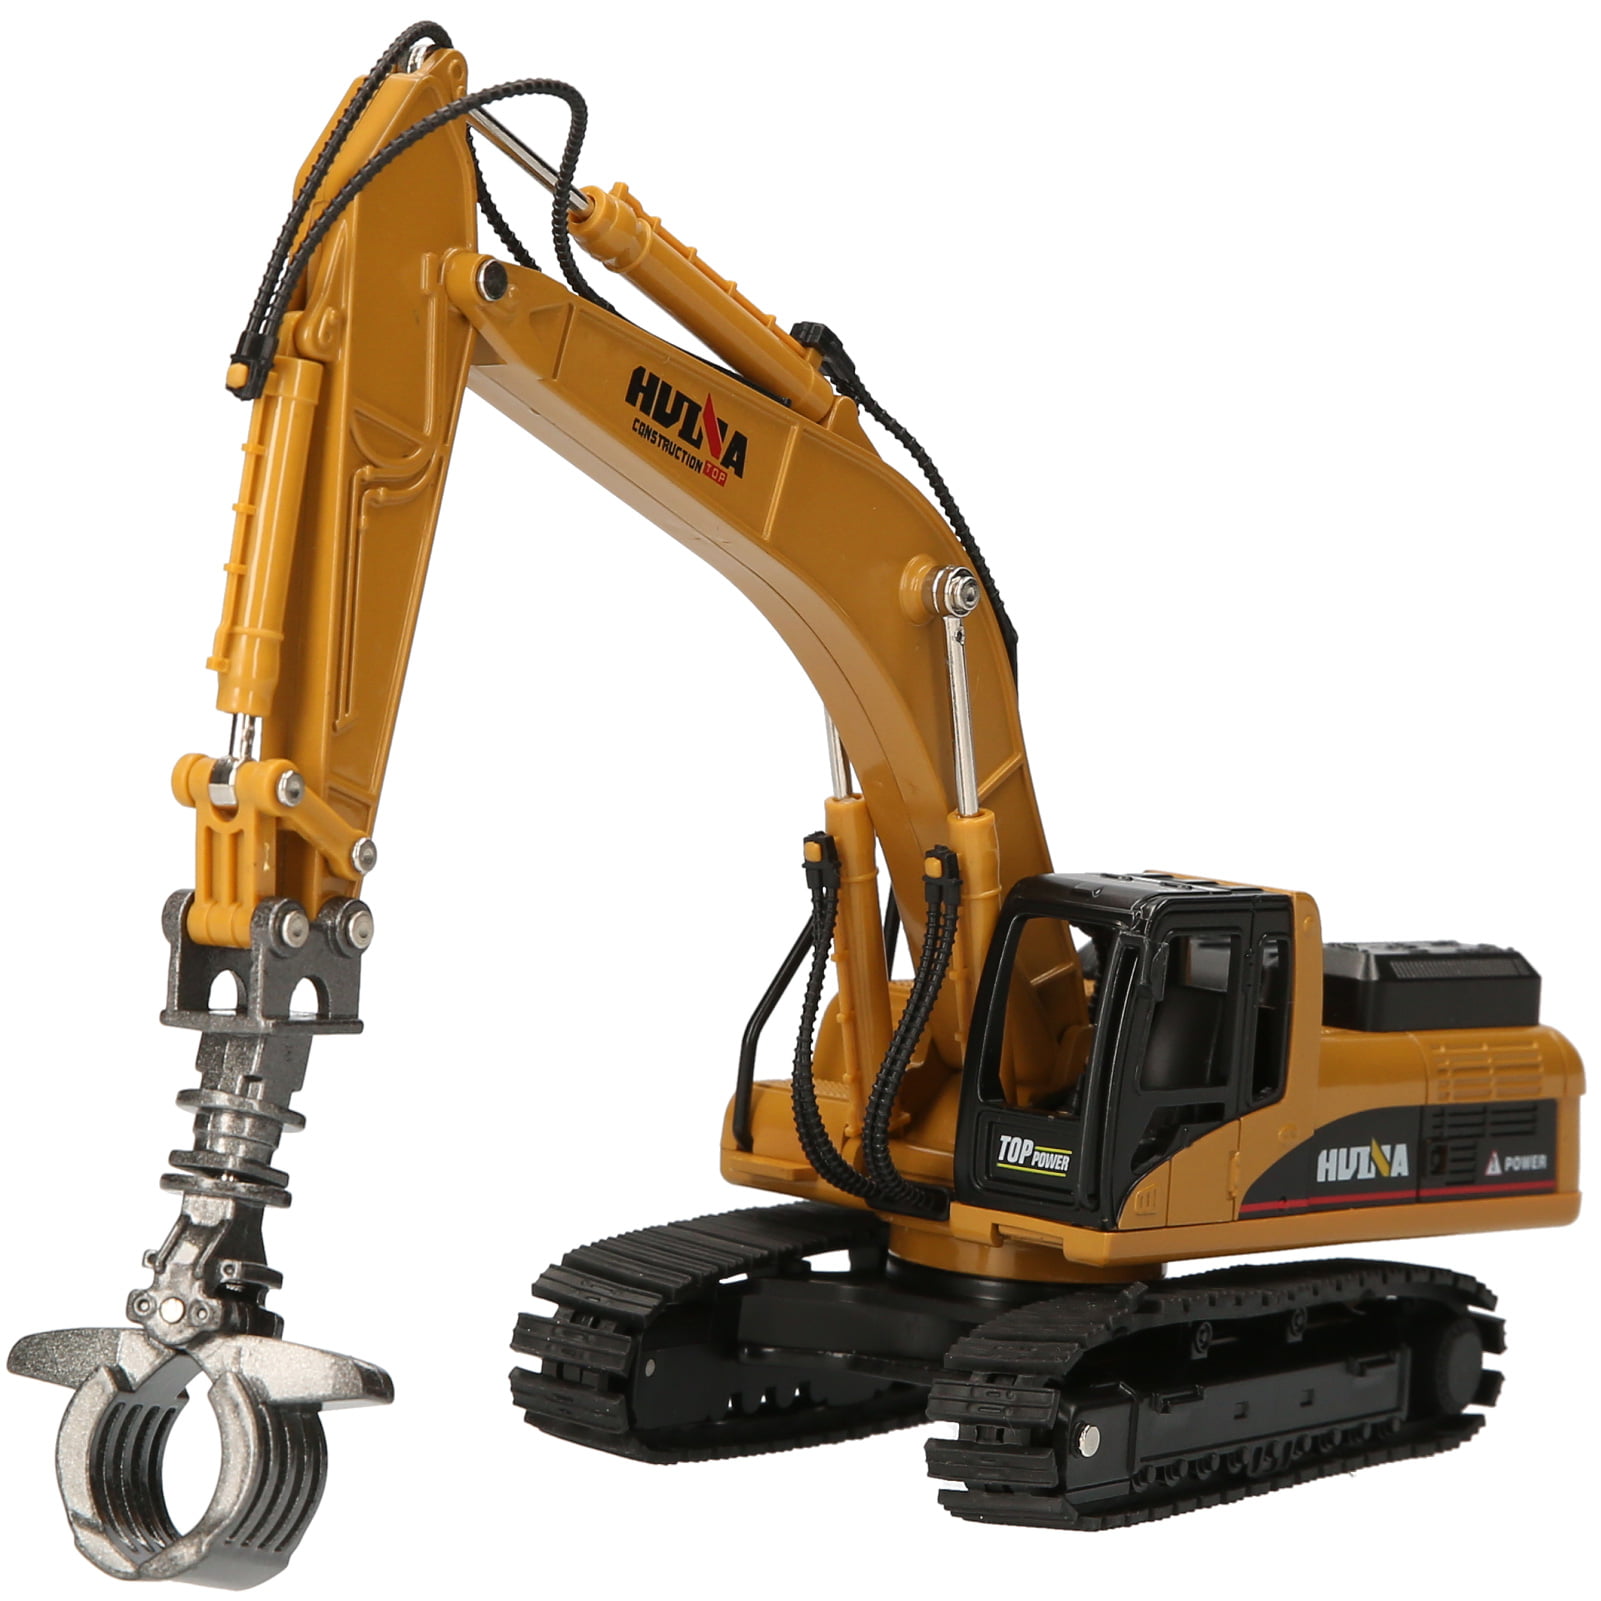 Details about   High simulation 1:50 alloy engineering excavator model,dump truck excavator toy 